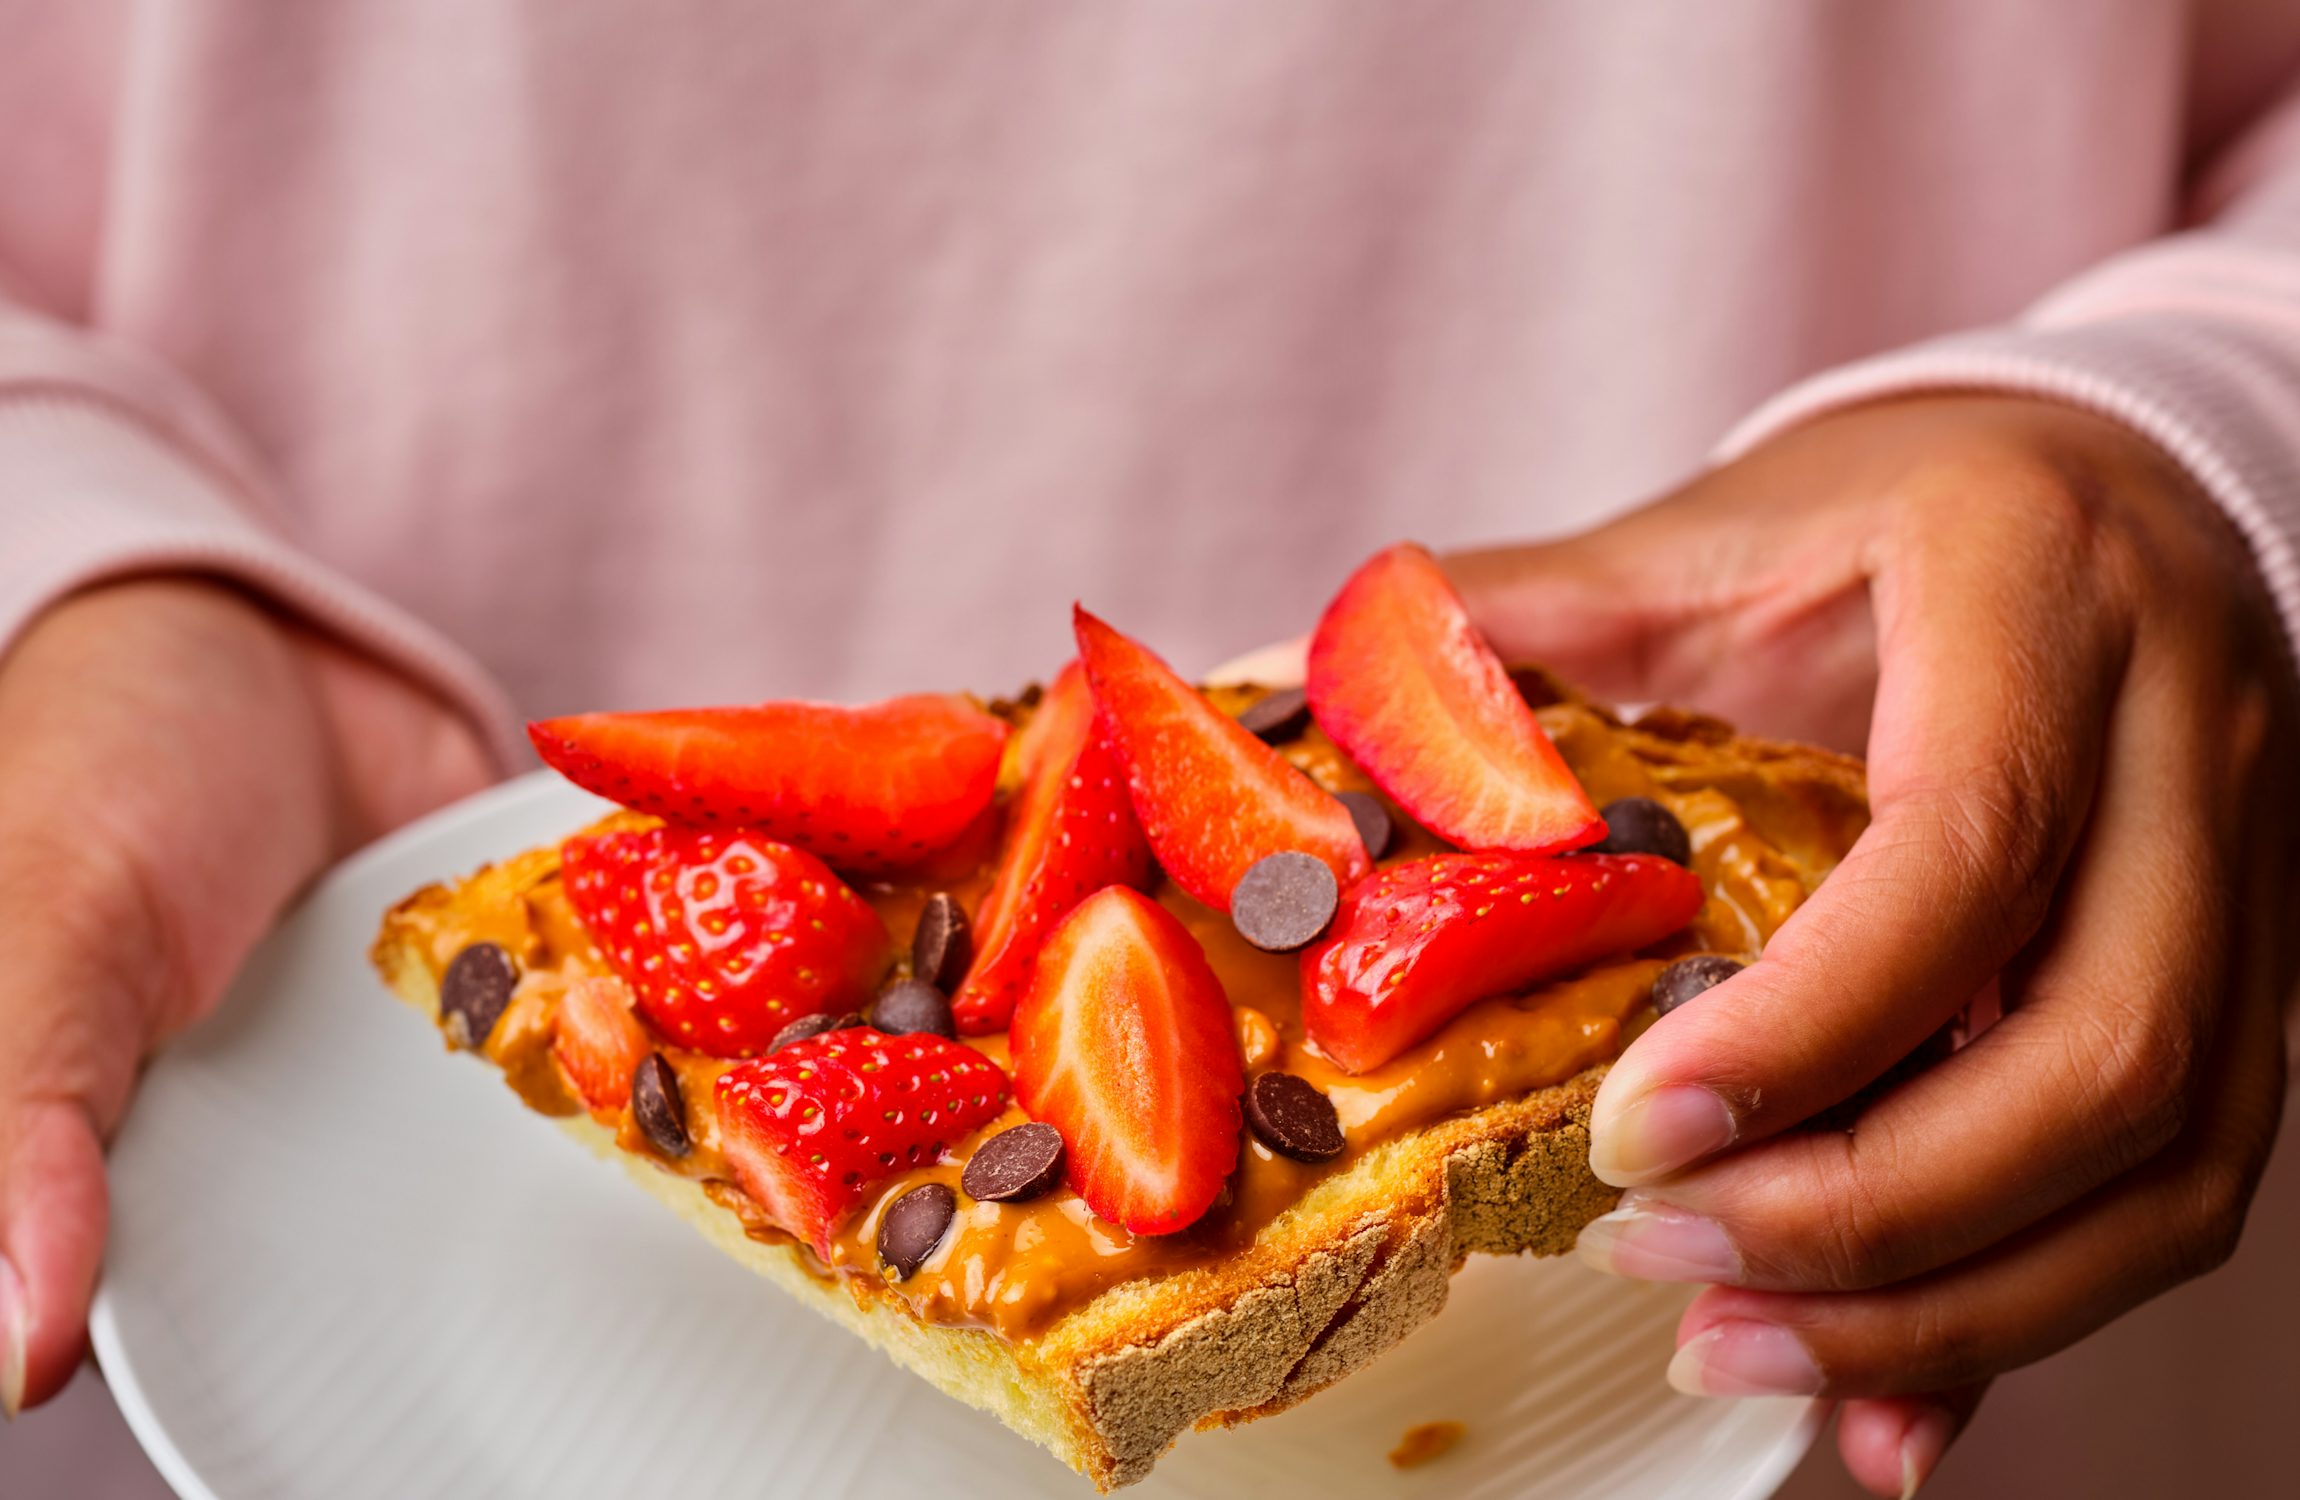 Strawberry, Chocolate Chip Peanut Butter Toast